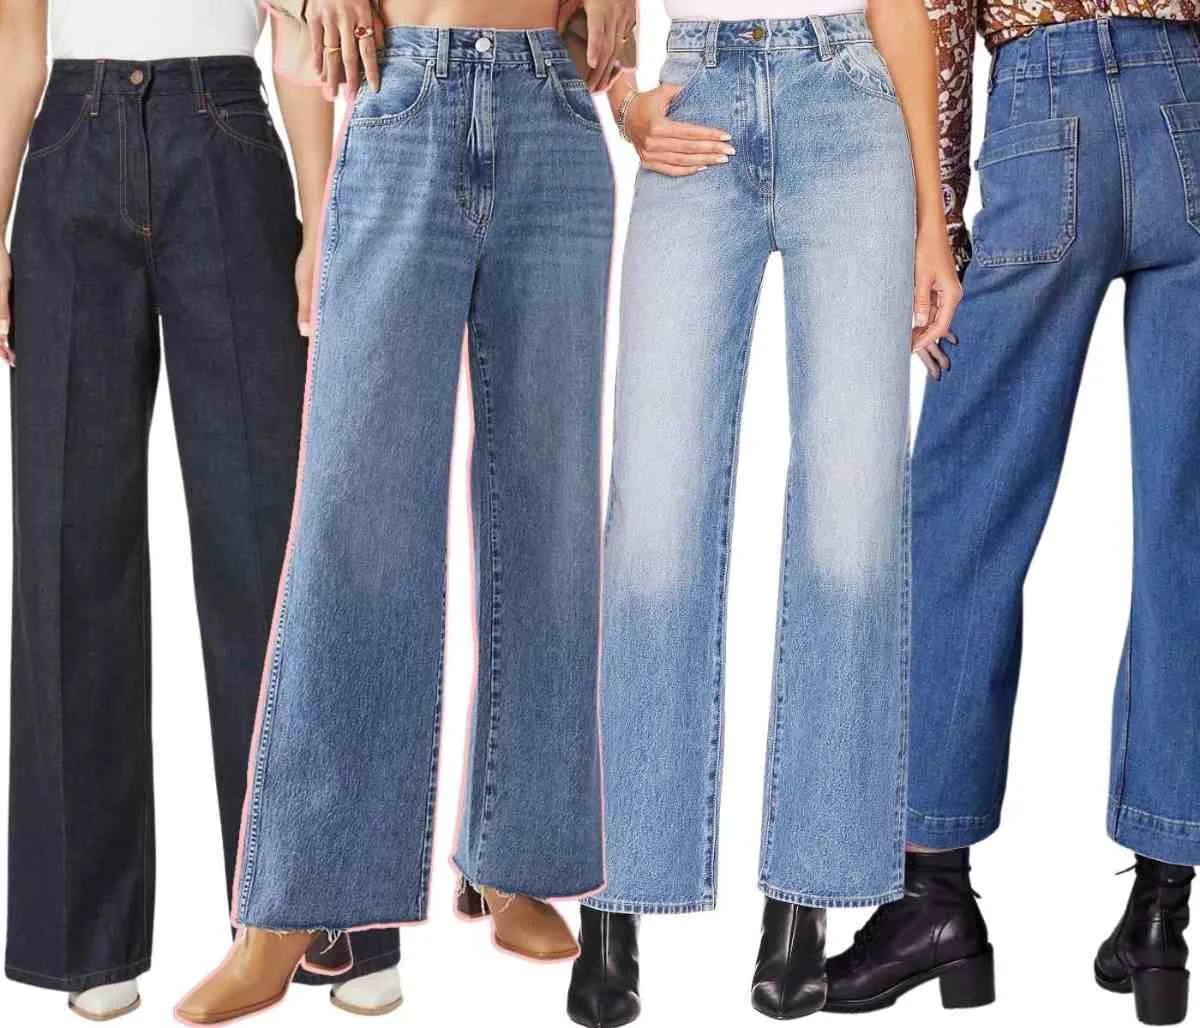 Collage of cropped view of 4 women's legs wearing different ankle boots with jeans that are wide legged.